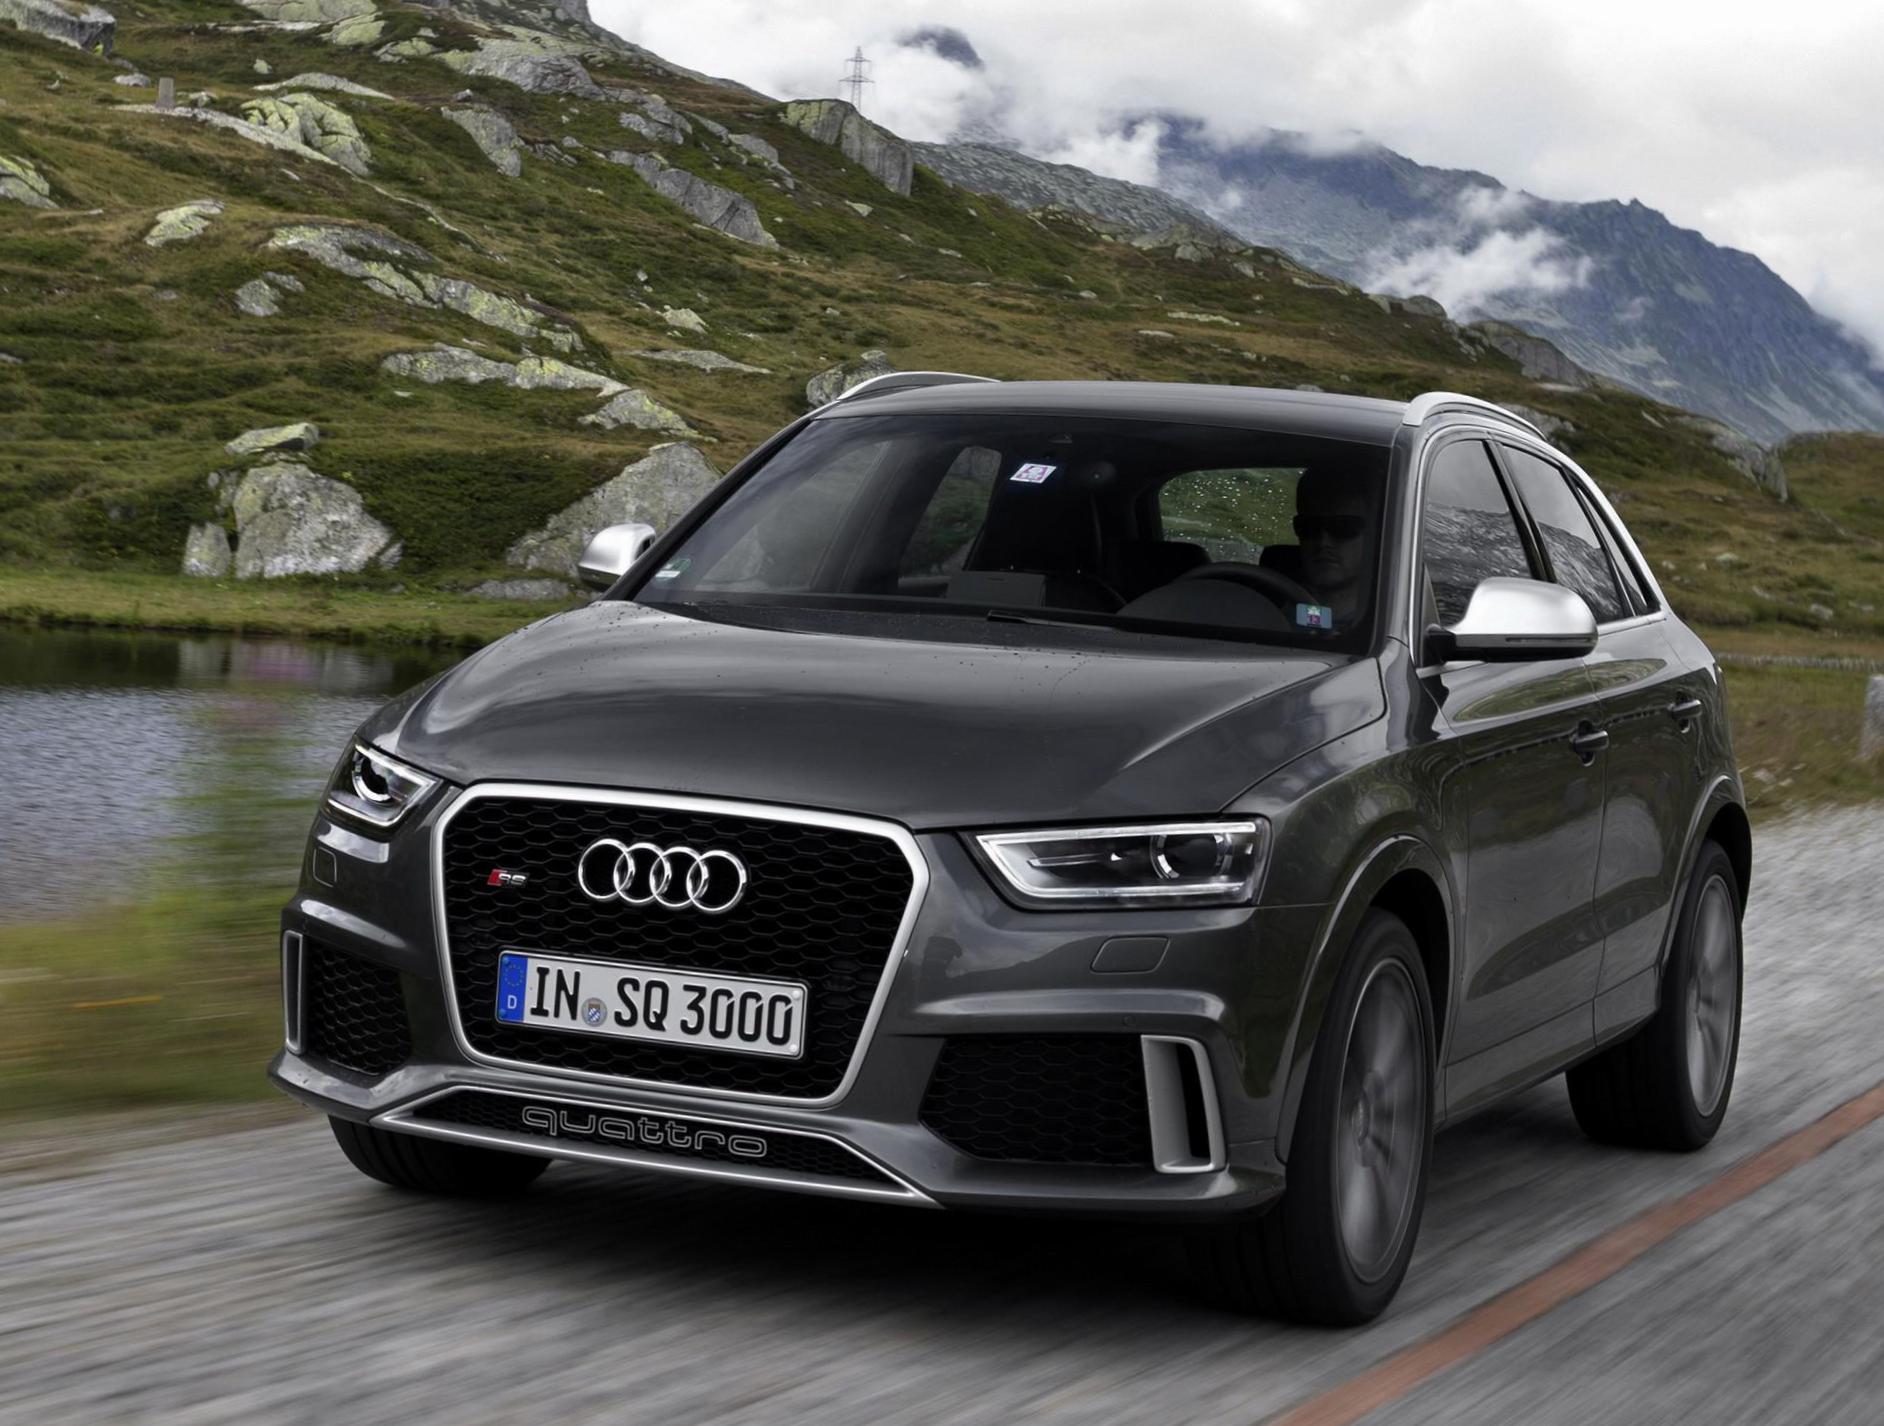 RS Q3 Audi Specifications wagon